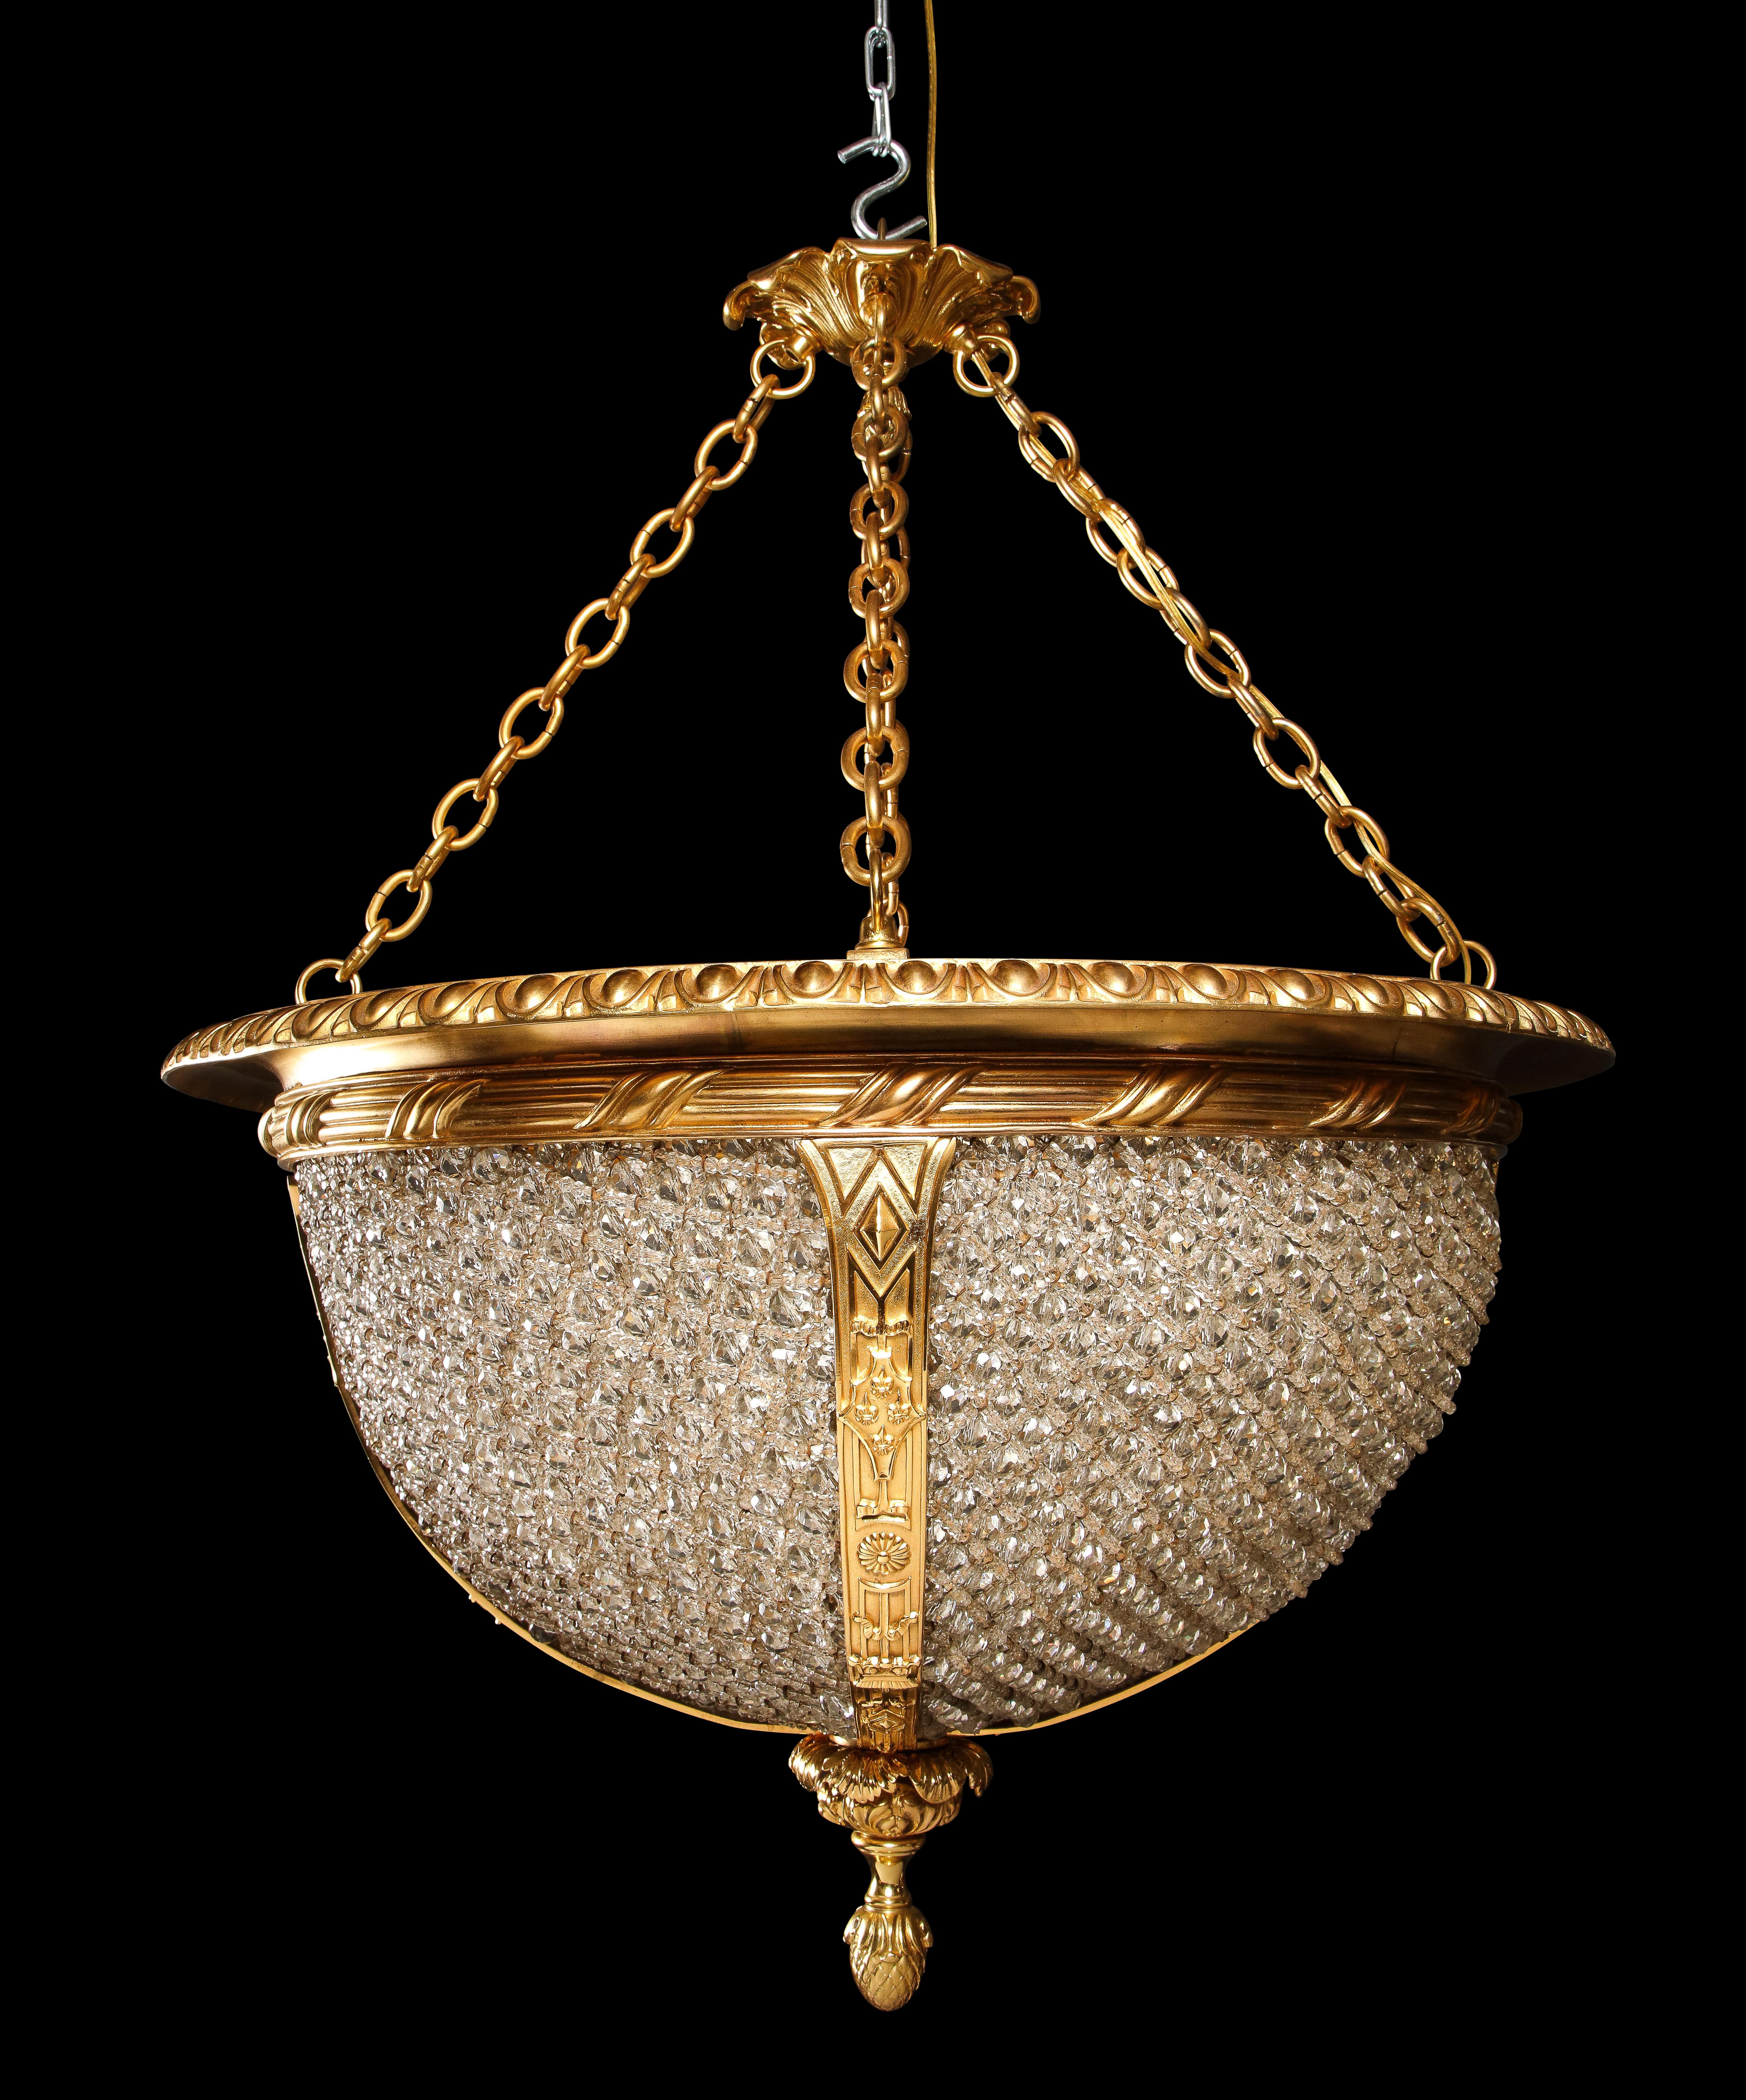 Hollywood Regency Gilt Bronze and beaded glass Circular Chandelier For Sale 8